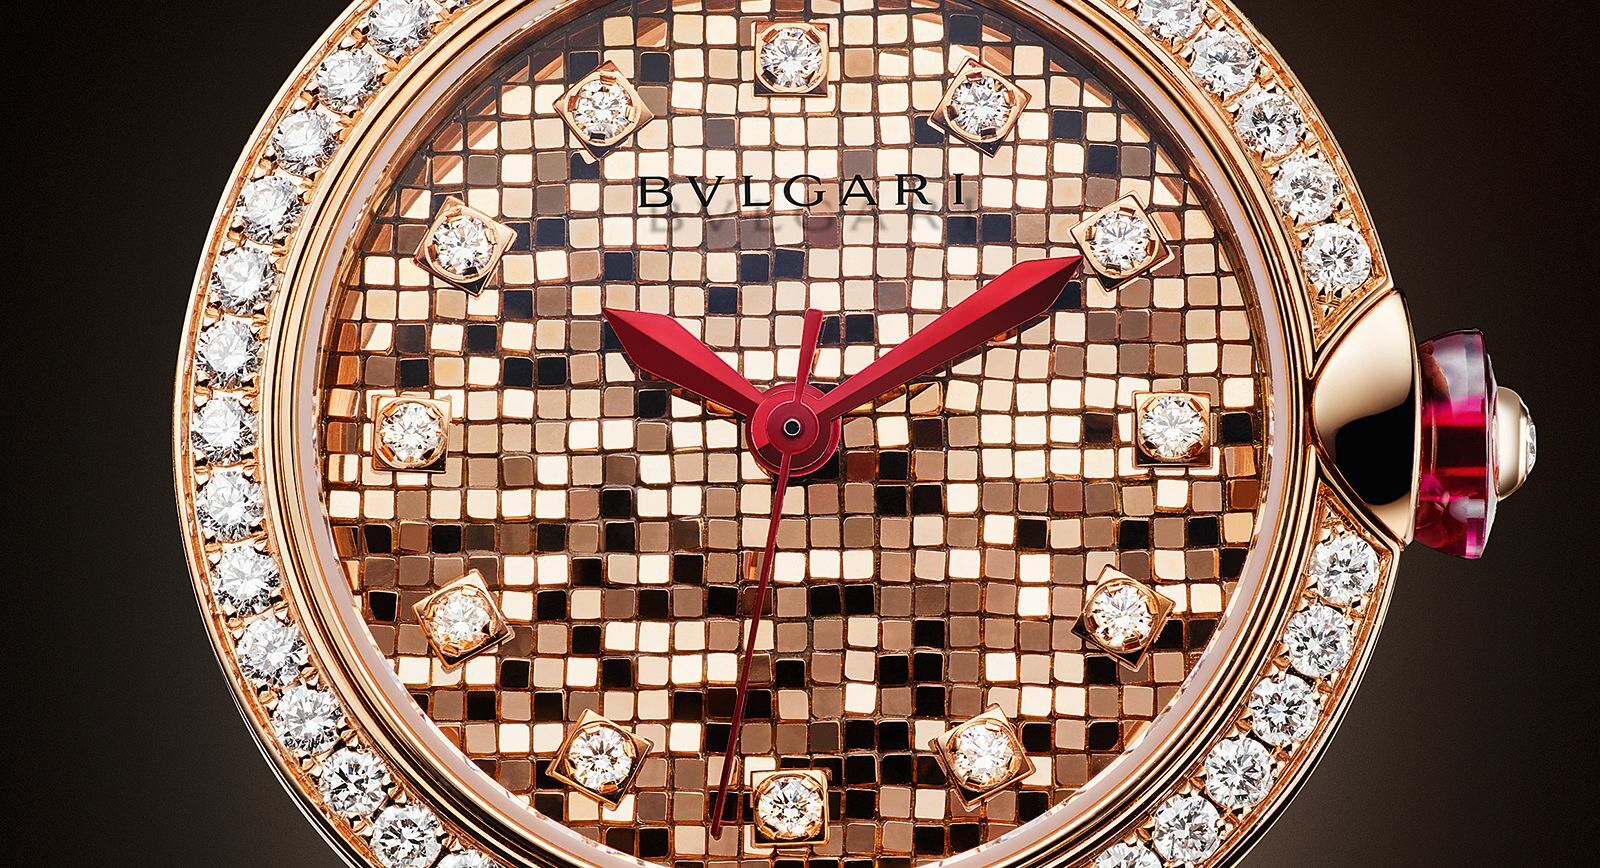 Lvcea Mosaique: Bvlgari added new creative model to its Lvcea watch line